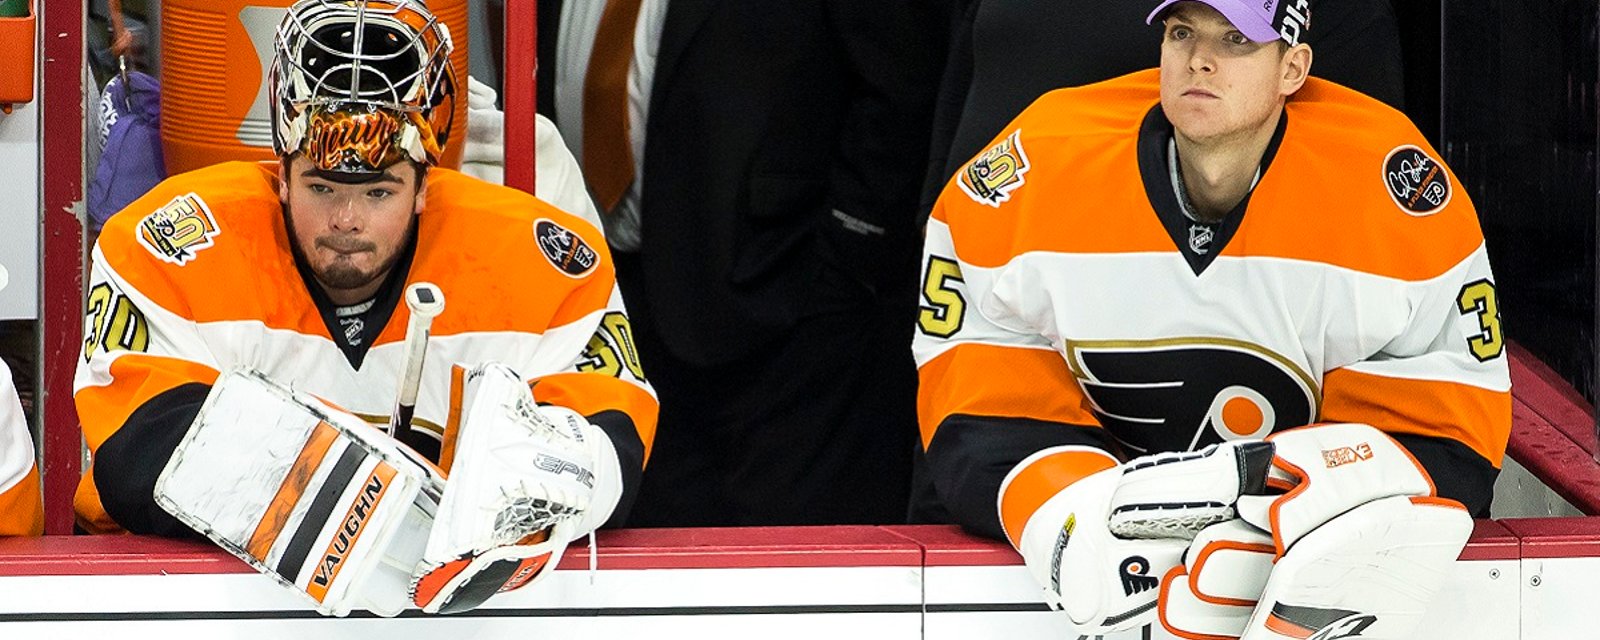 Flyers prospect giving the team big hope for their future in goal.